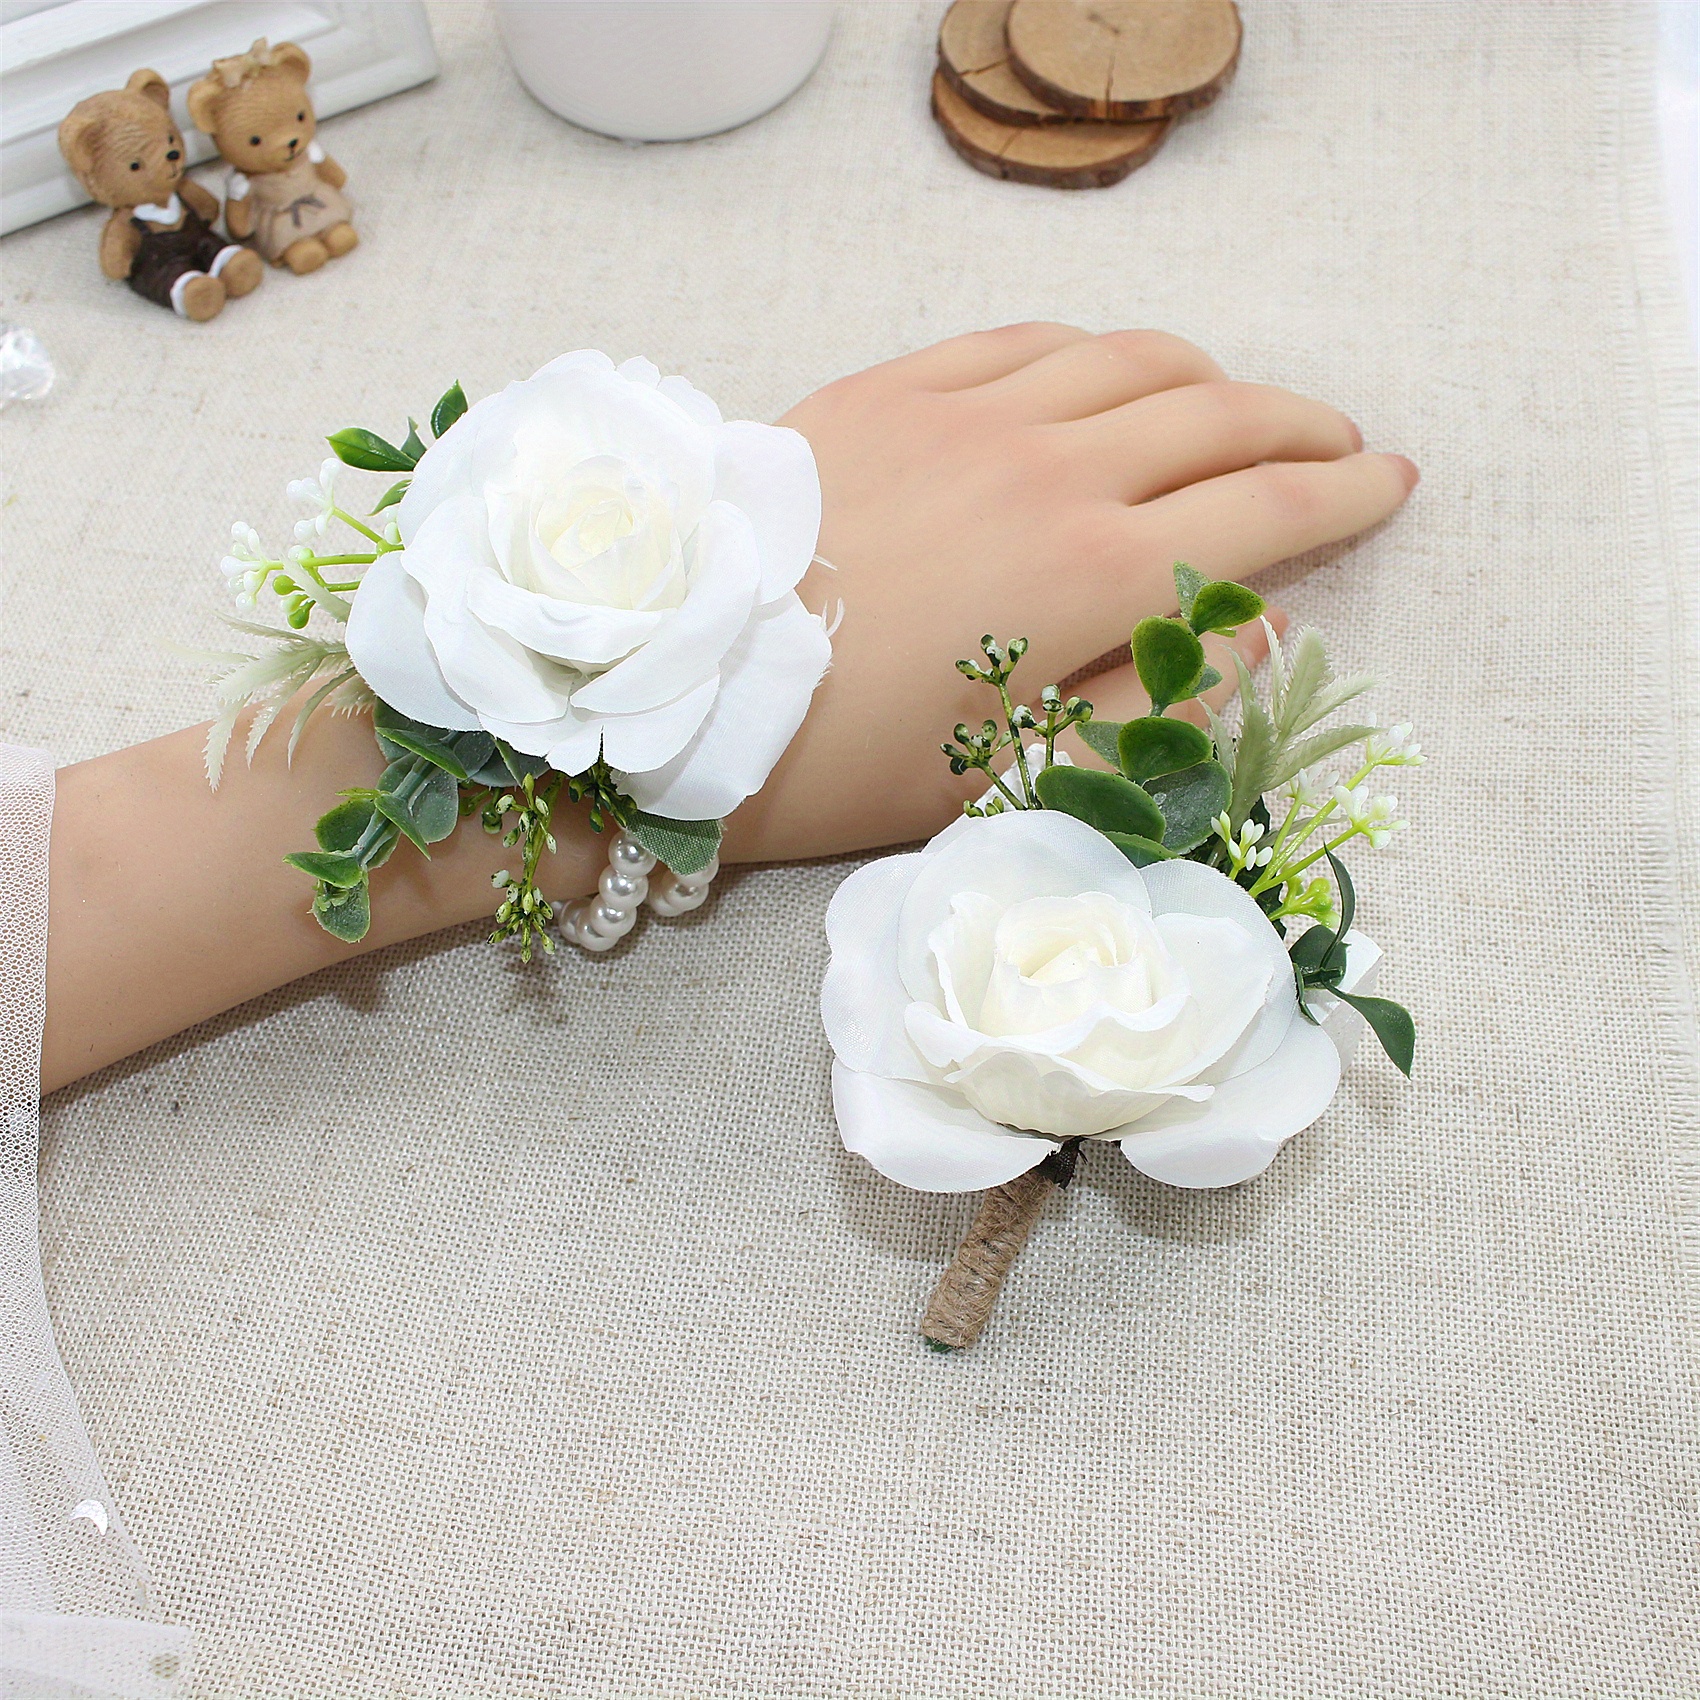  Meldel Wrist Corsage Bracelets for Wedding Mother of Bride and  Groom, Green Silk Rose Wrist Hand Prom Flower Ceremony Anniversary,Dinner  Party, Homecoming, Set of 6